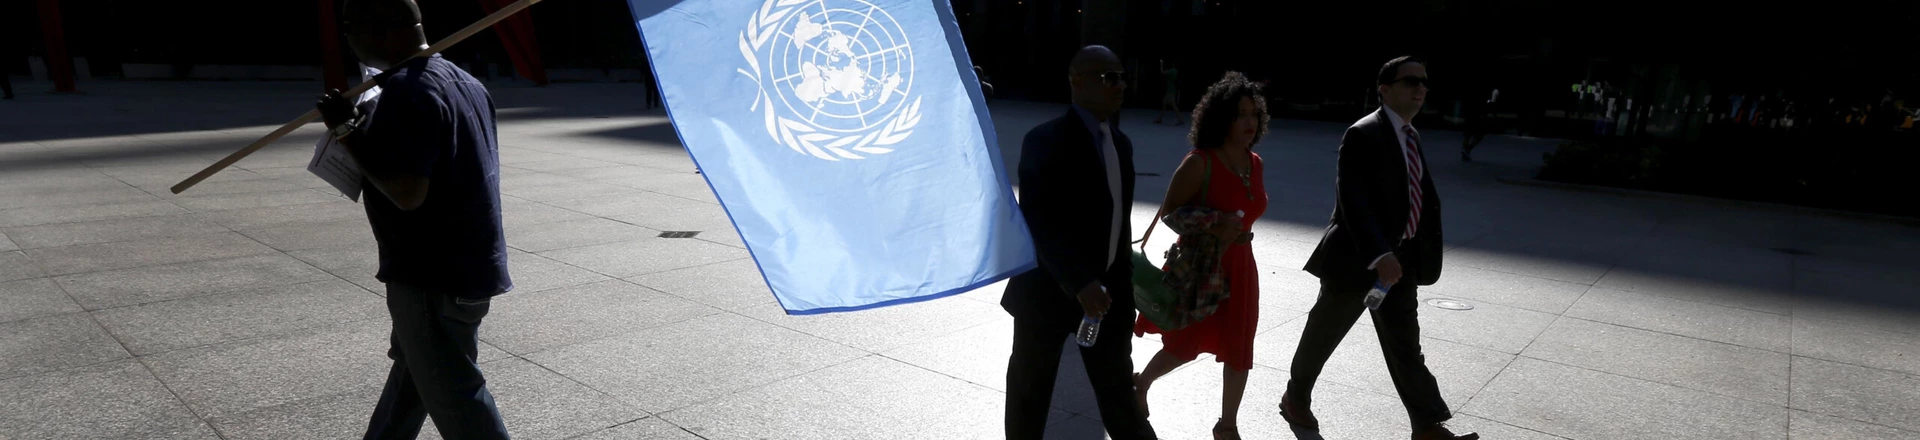 A protester is silhouetted as he carries the United Nations flag during a rally against Nigerian President Buhari as pedestrians walk through federal plaza Wednesday, Sept. 20, 2017, in Chicago. (AP Photo/Charles Rex Arbogast)